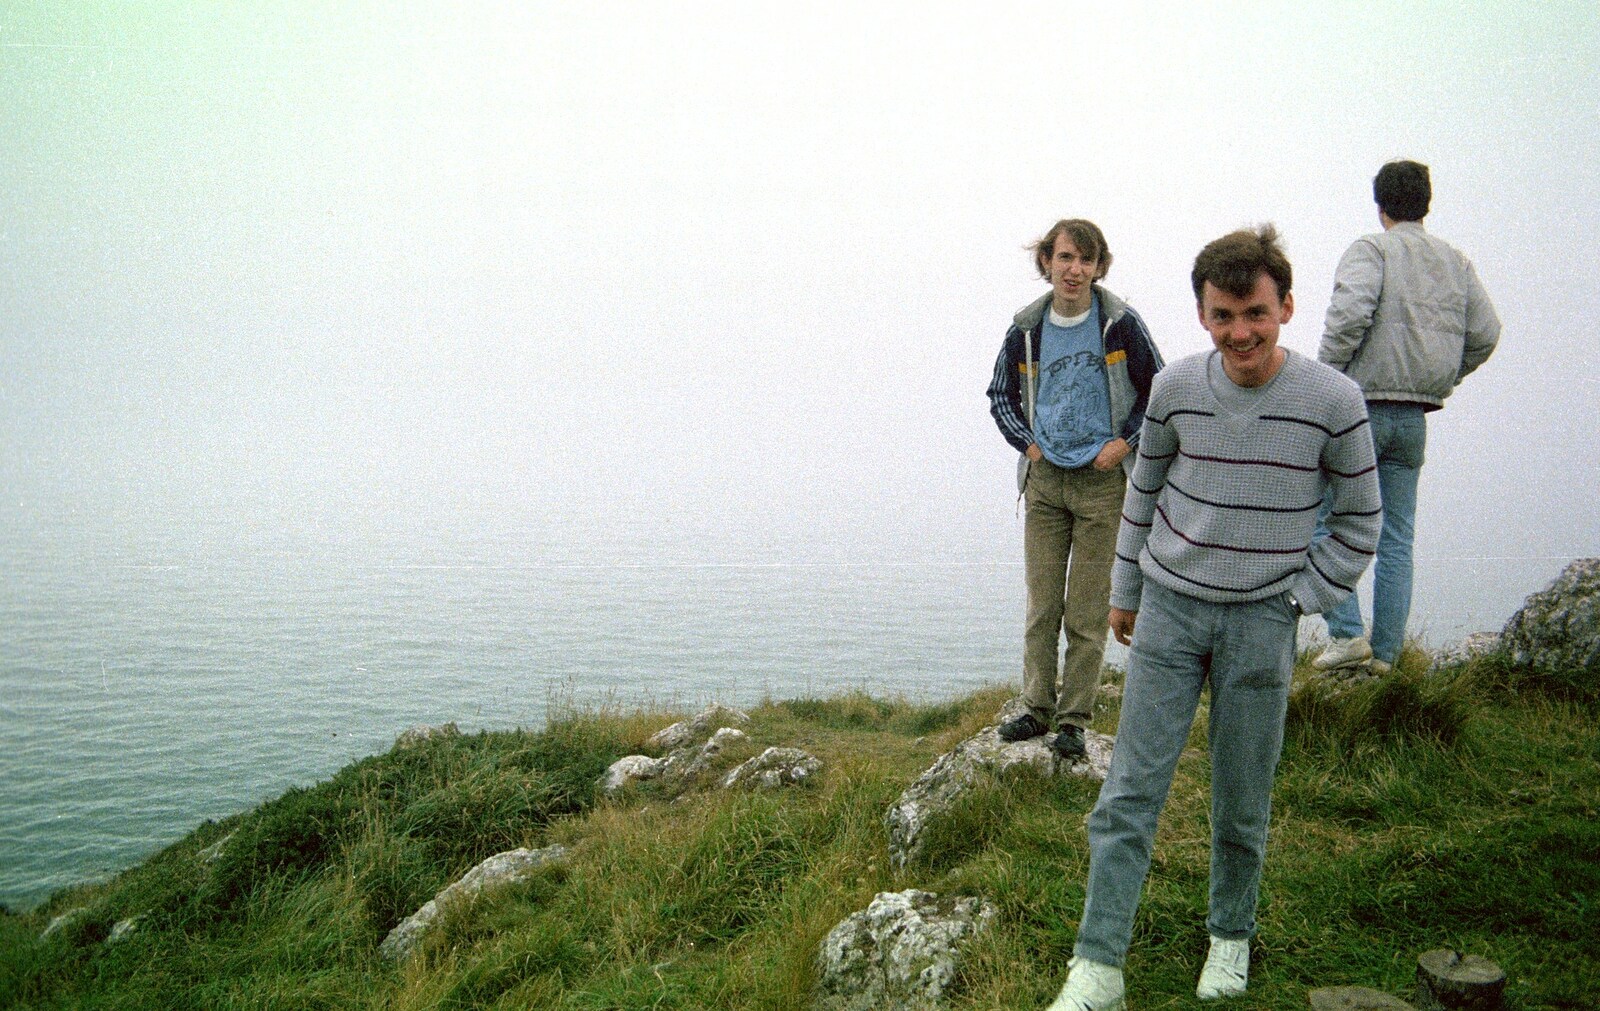 Dave, John and Riki at Whitsand Bay from A Trip to Trotsky's Mount, Dartmoor, Devon - 20th March 1987